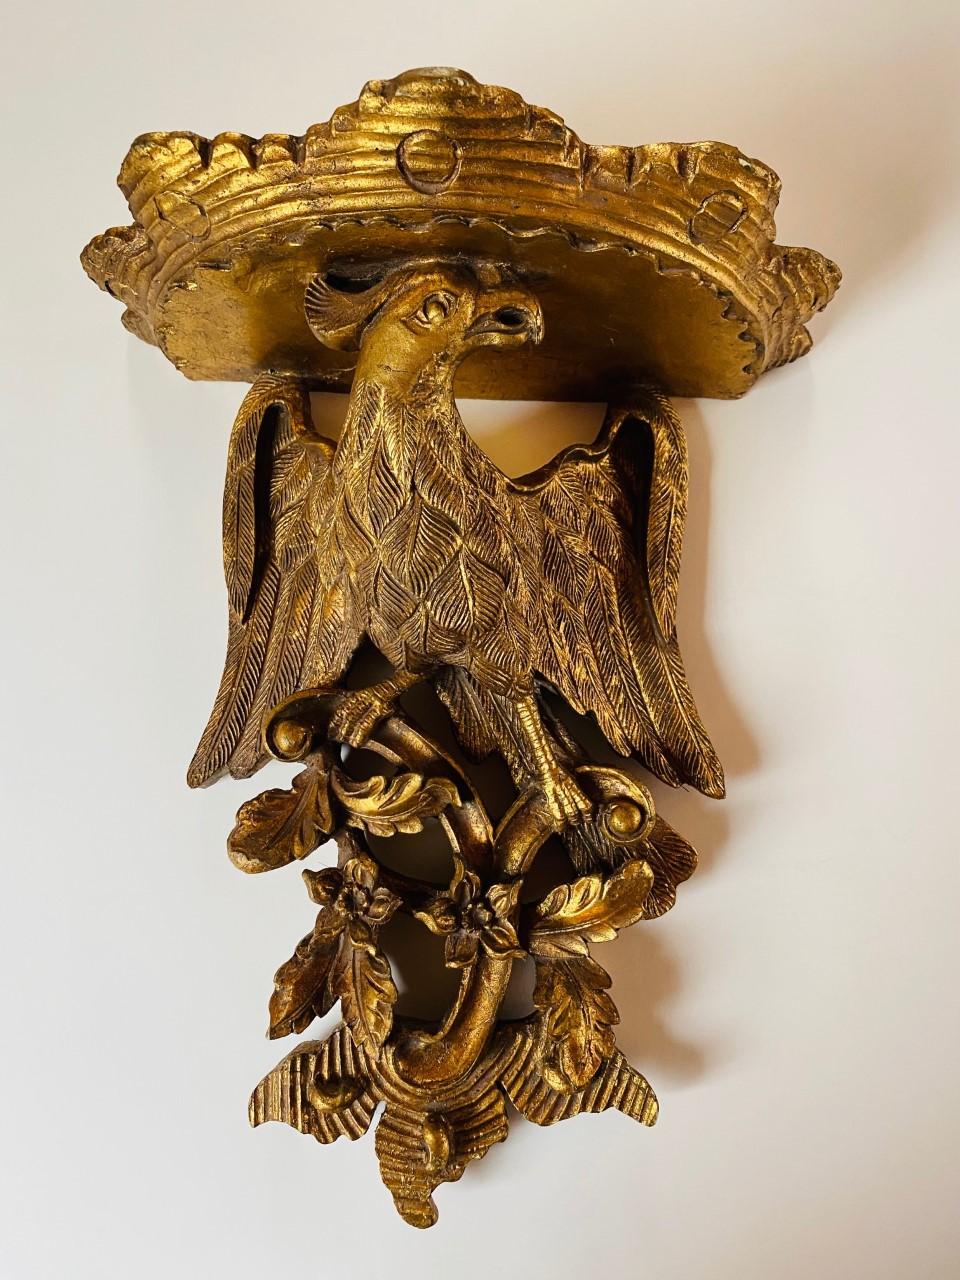 Vintage pair of eagle composite wood carved wall shelf sconces in a gilt finish. Each sconce is finely sculpted and the pair will complement and elevate any décor or use. The pair will enhance your Art Deco or Hollywood Regency styles. An ideal